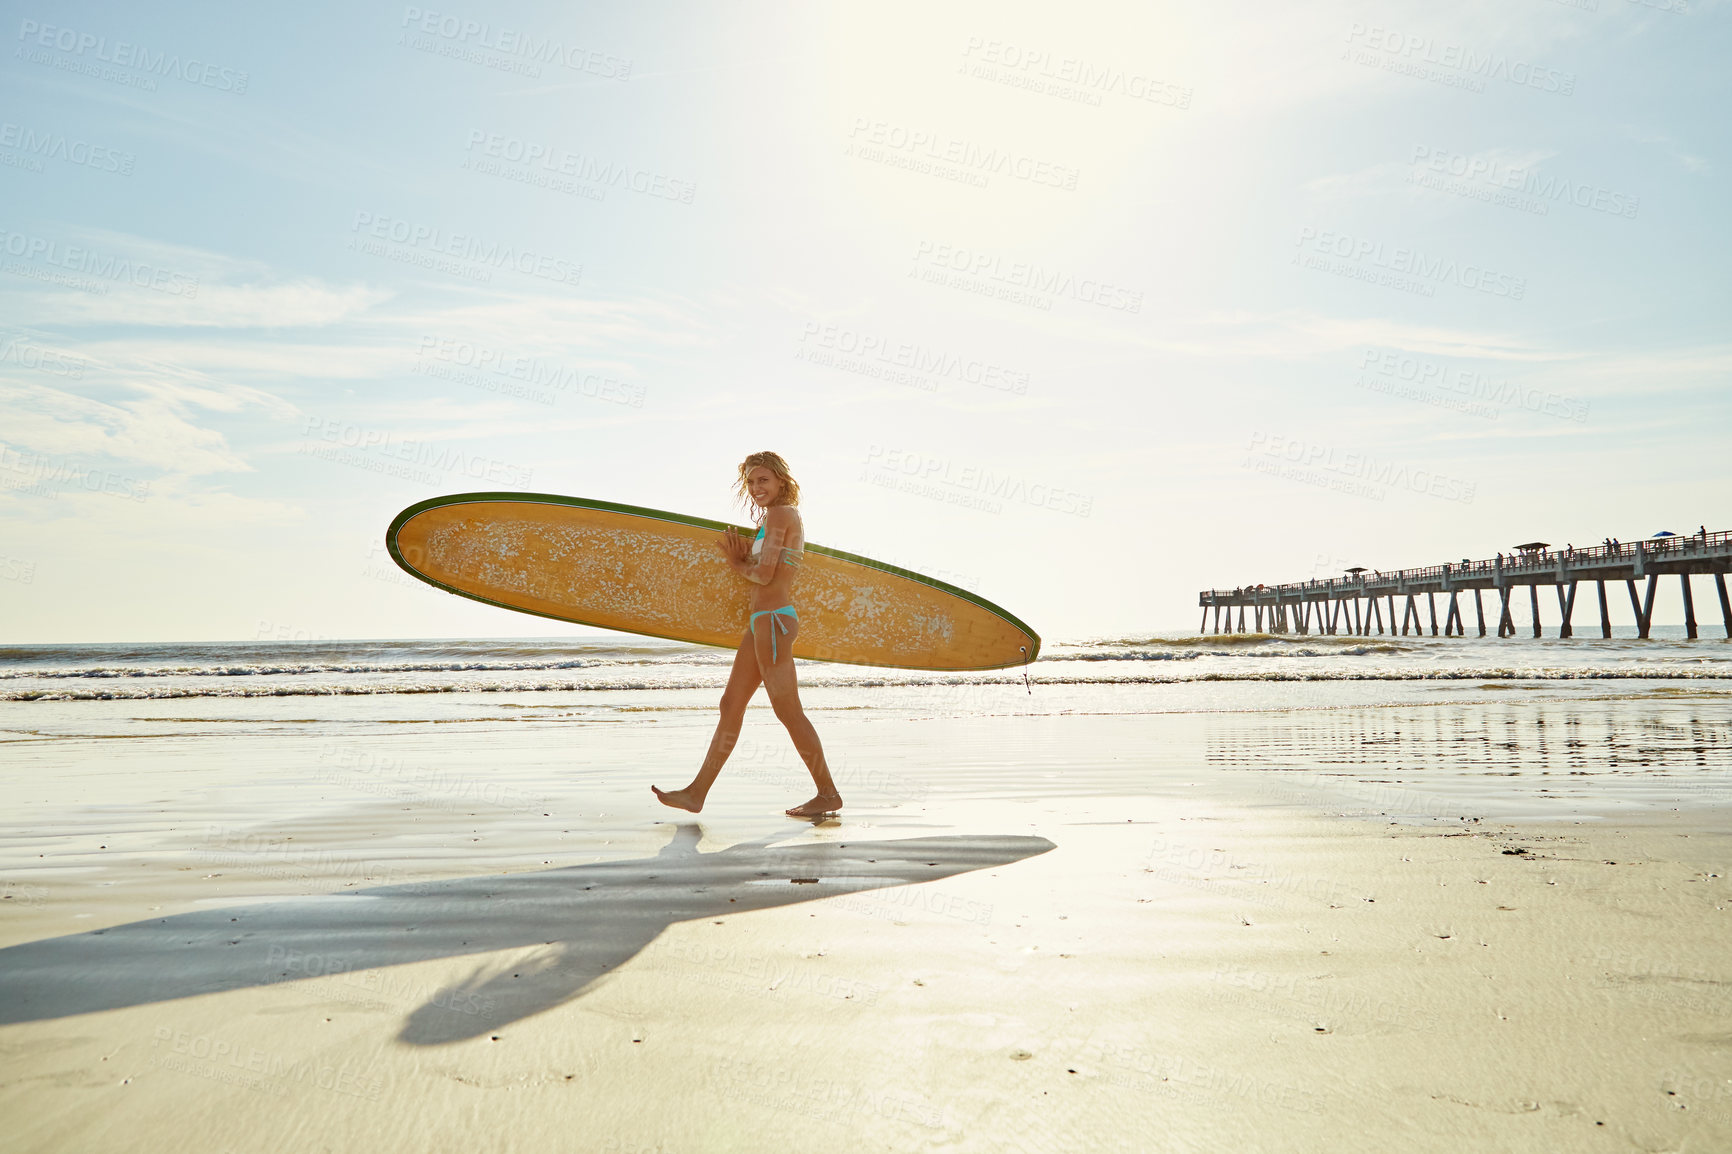 Buy stock photo Shot of an attractive young woman carrying her surfboard on the beach